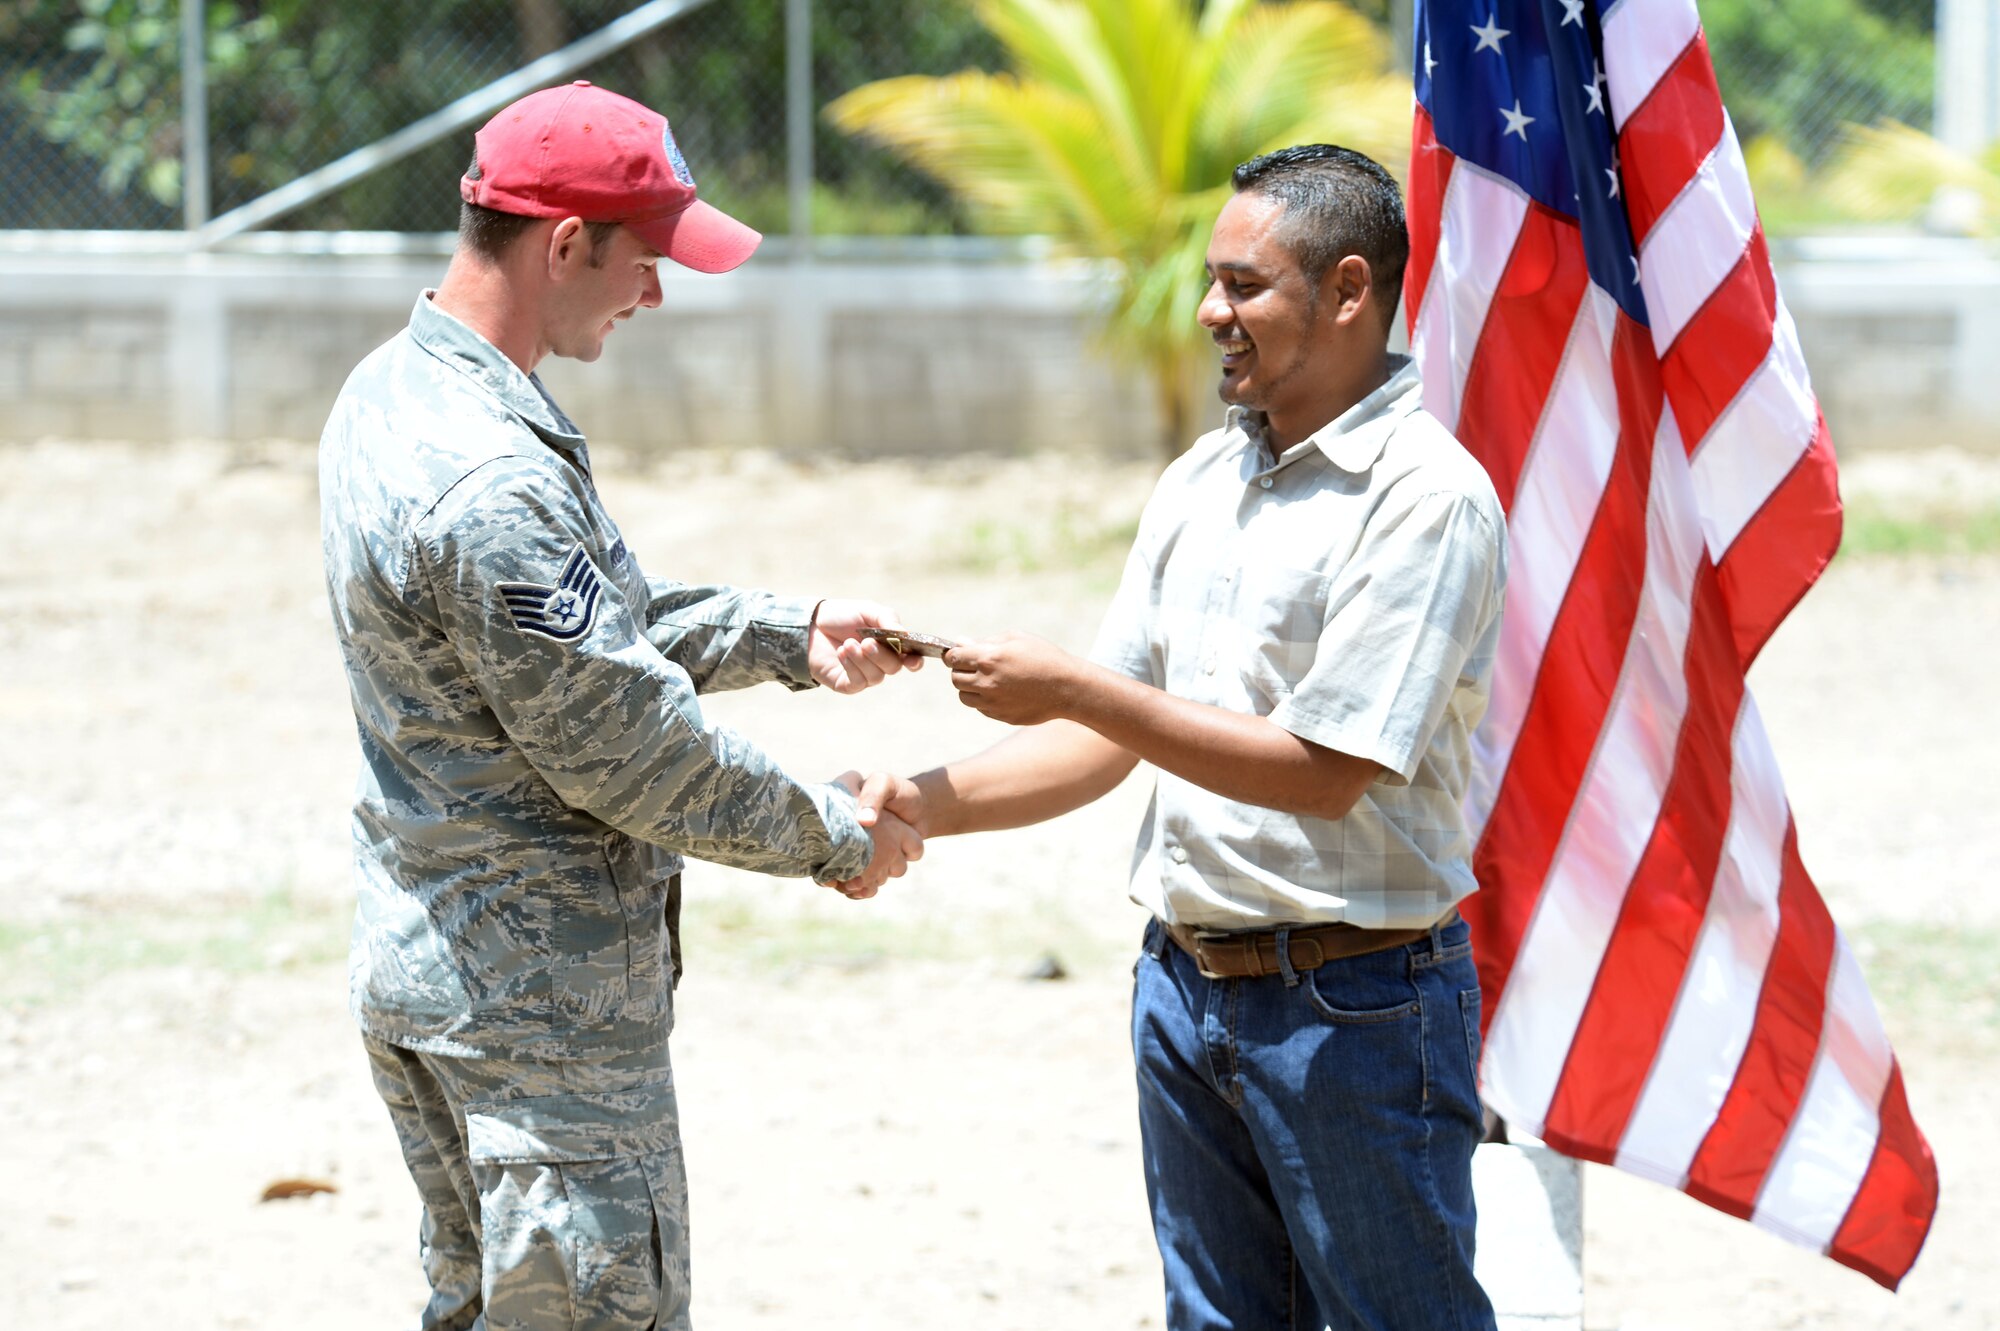 Gabriela Mistral School Principal Abraham Ruiz hands a gift to U.S. Air Force Staff Sgt. Nathan Rosier, 823rd Expeditionary RED HORSE Squadron structural craftsman and Tampa, Fla., native, as a token of his appreciation for the work that he and other members of the New Horizons Honduras 2015 training exercise performed in the construction of a new two-classroom schoolhouse during a ribbon-cutting ceremony at Ocotes Alto, Honduras, July 28, 2015. Ruiz gave a gift to every member of the New Horizons team that worked in the construction of the building. New Horizons was launched in the 1980s and is an annual joint humanitarian assistance exercise that U.S. Southern Command conducts with a partner nation in Central America, South America or the Caribbean. The exercise improves joint training readiness of U.S. and partner nation civil engineers, medical professionals and support personnel through humanitarian assistance activities. (U.S. Air Force photo by Capt. David J. Murphy/Released)